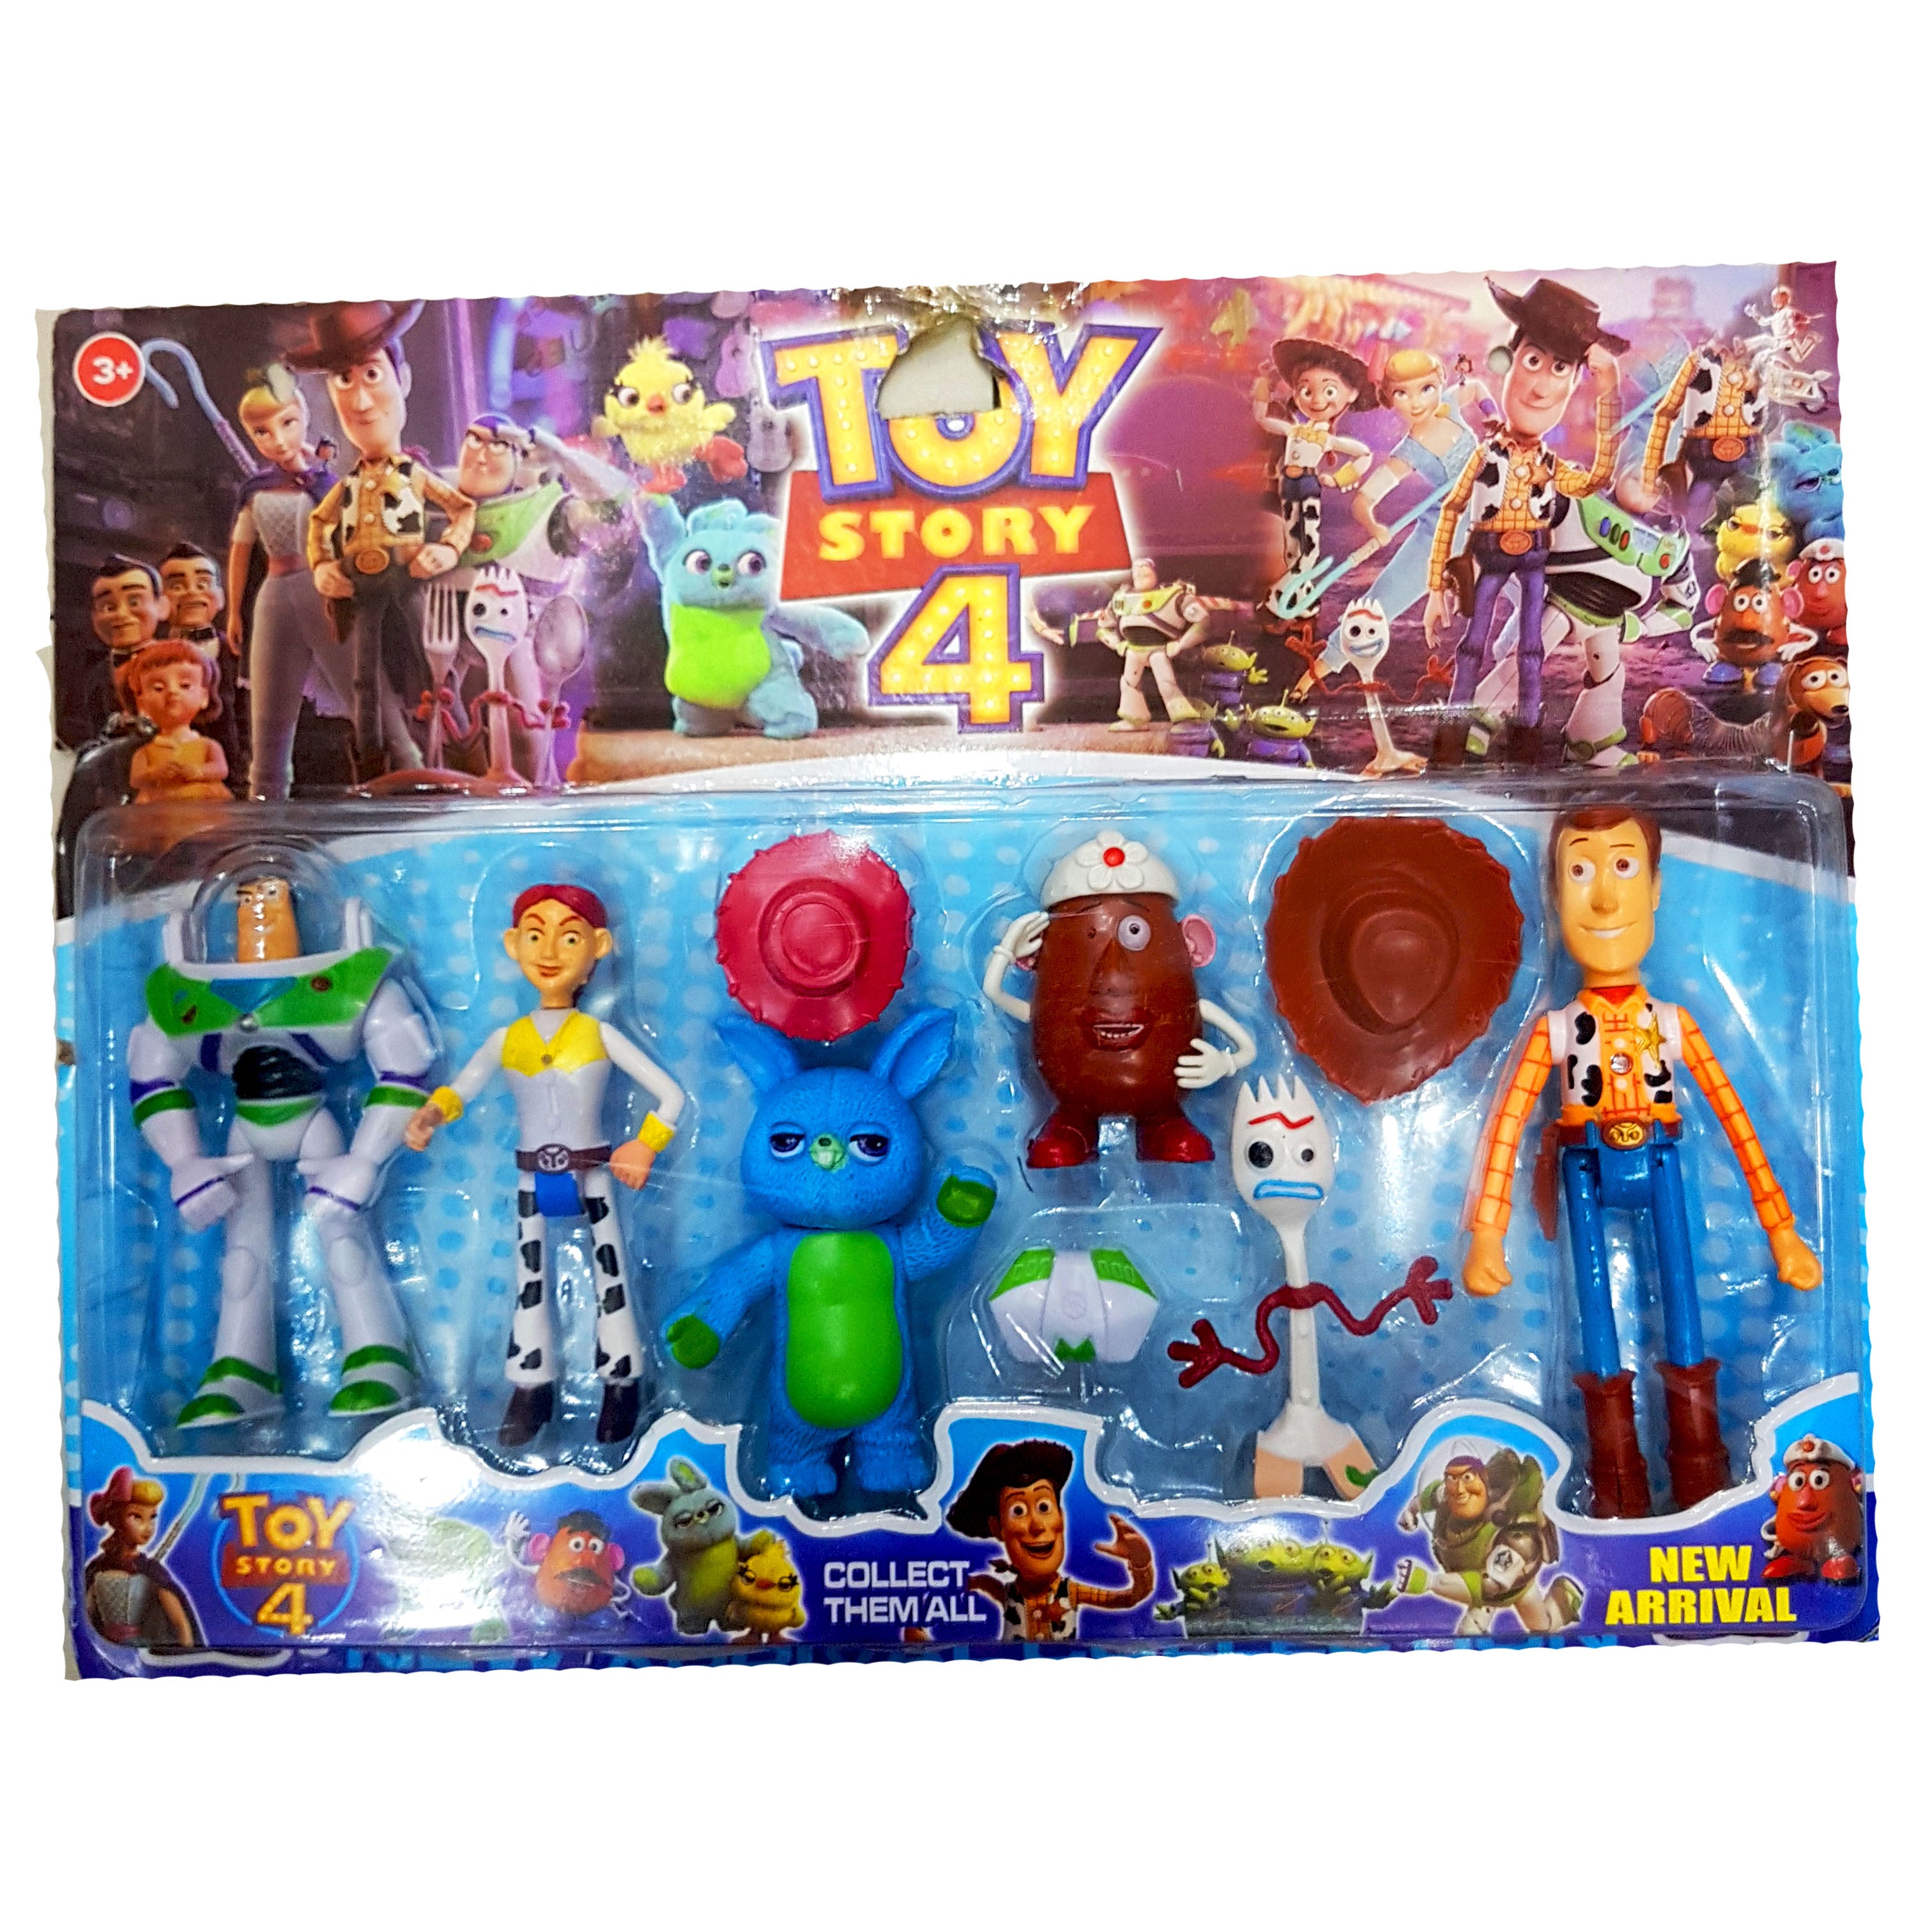 New Arrival Toy Story 4 Action Figure Set - 5-Piece Collector's Edition, Ideal Gift for Kids Ages 3 & Up and Toy Story Enthusiasts